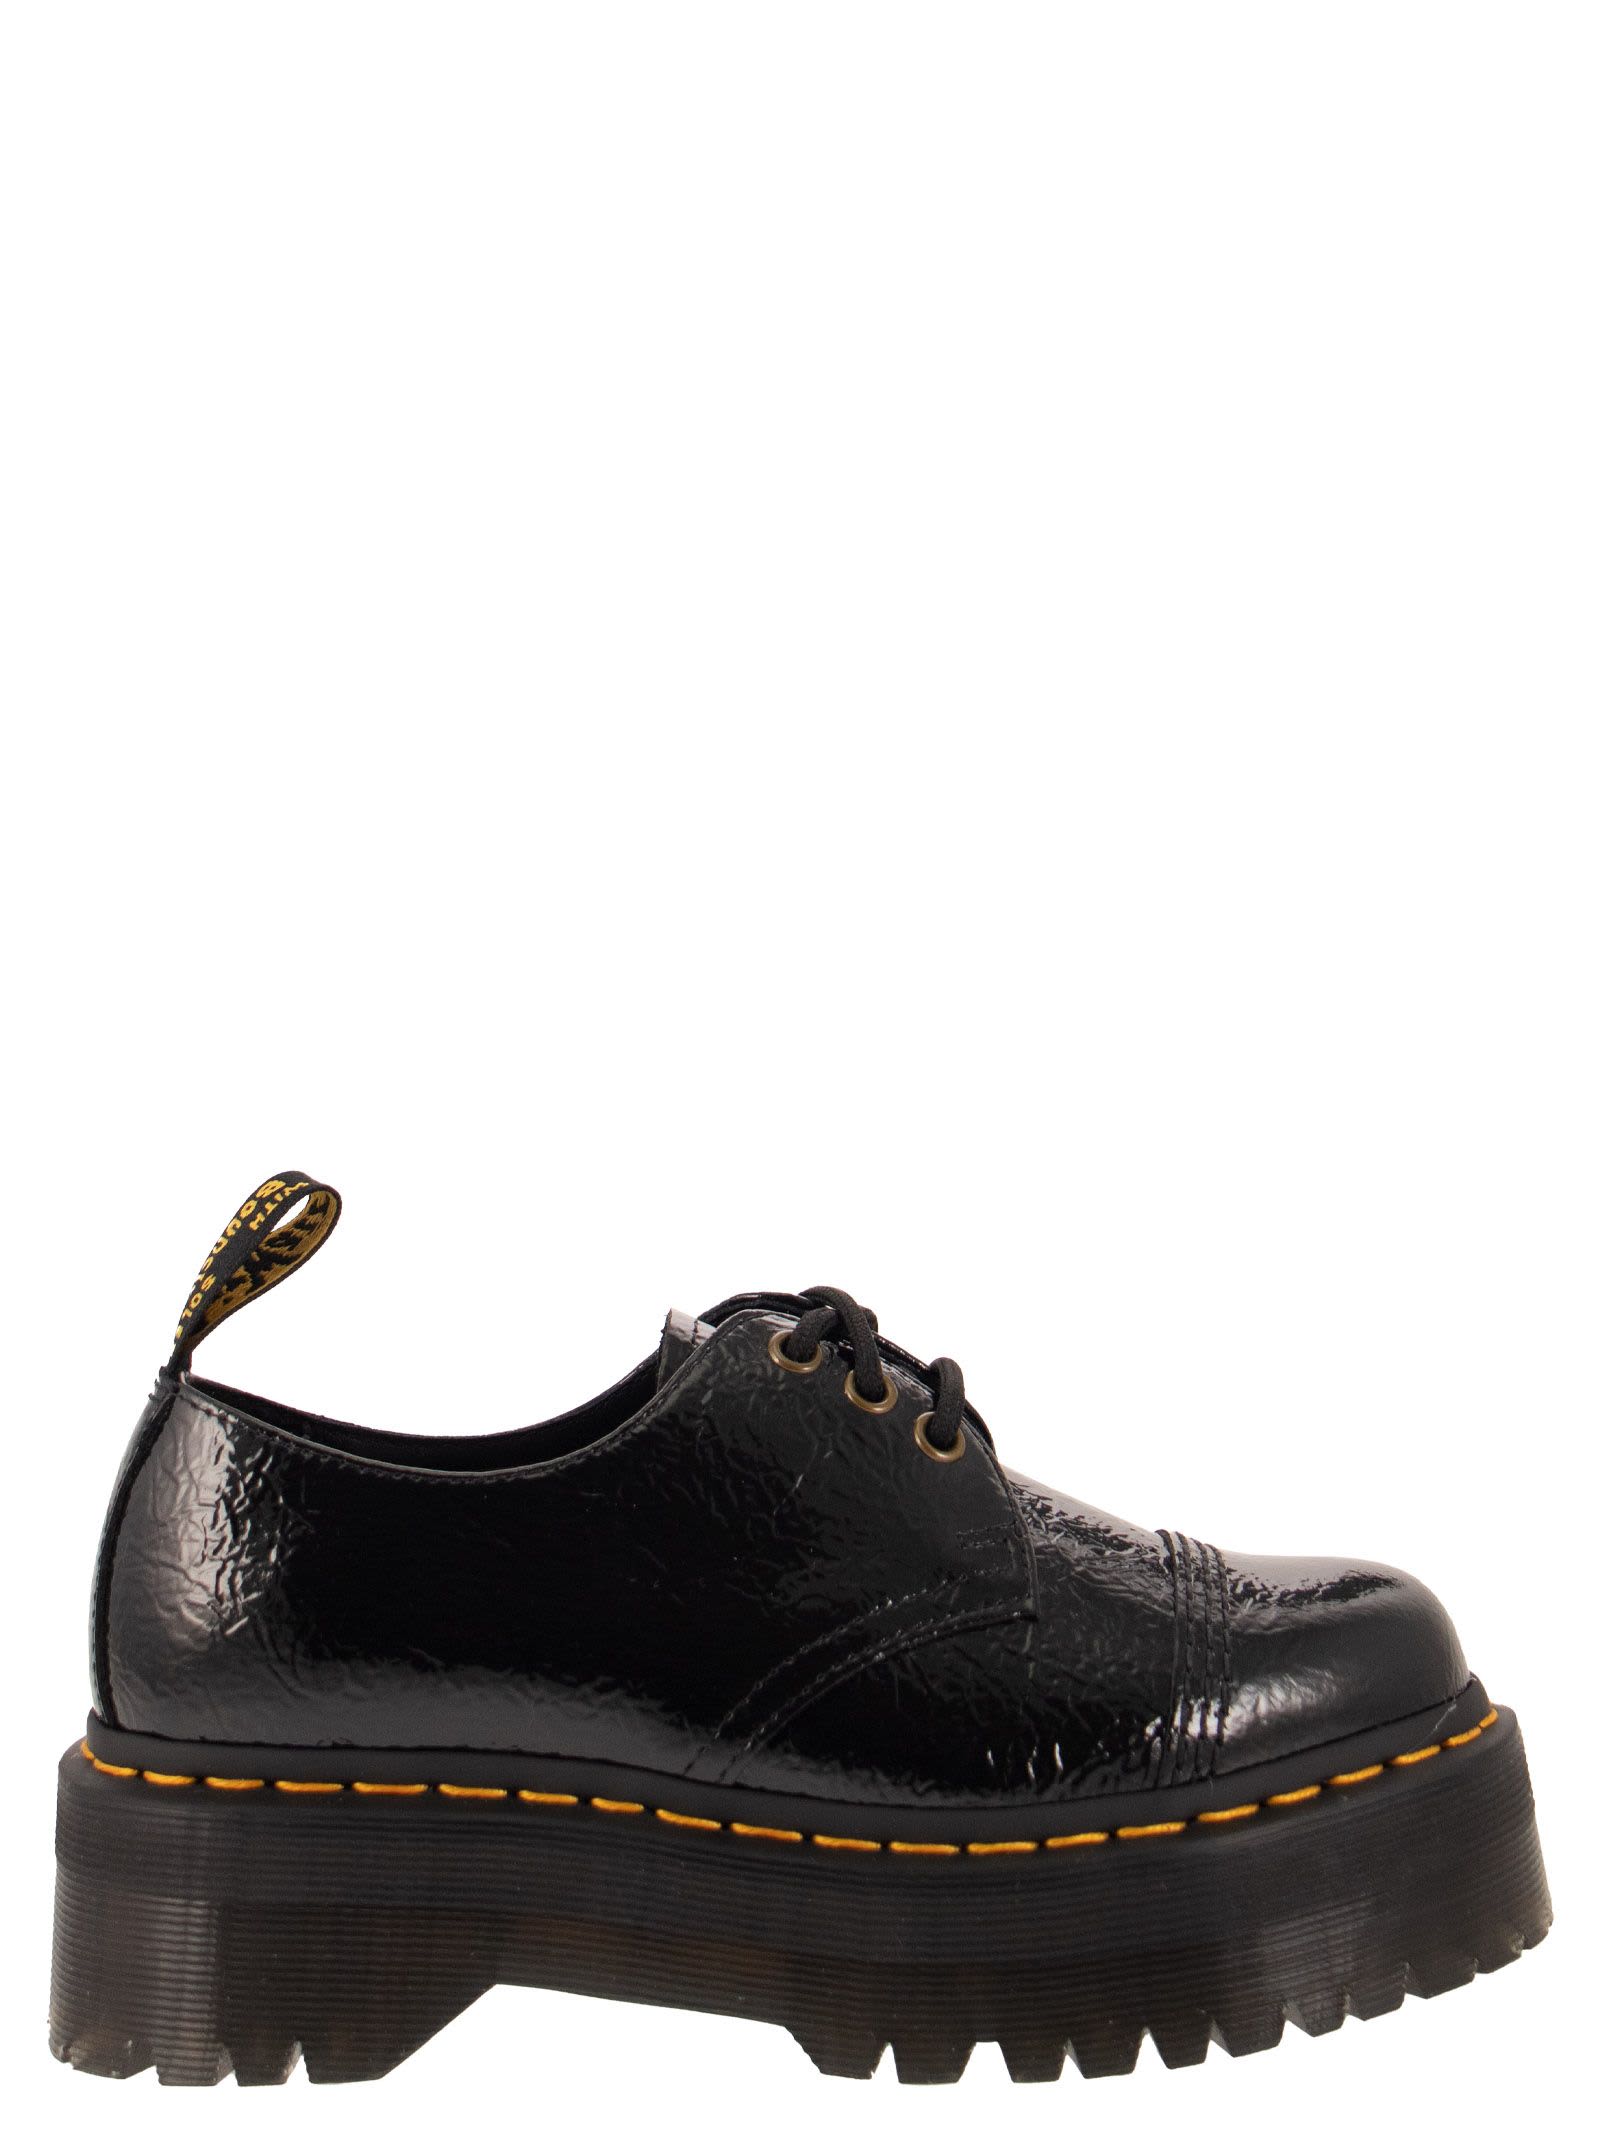 Dr. Martens 1461 Quad - Laced In Patent Leather